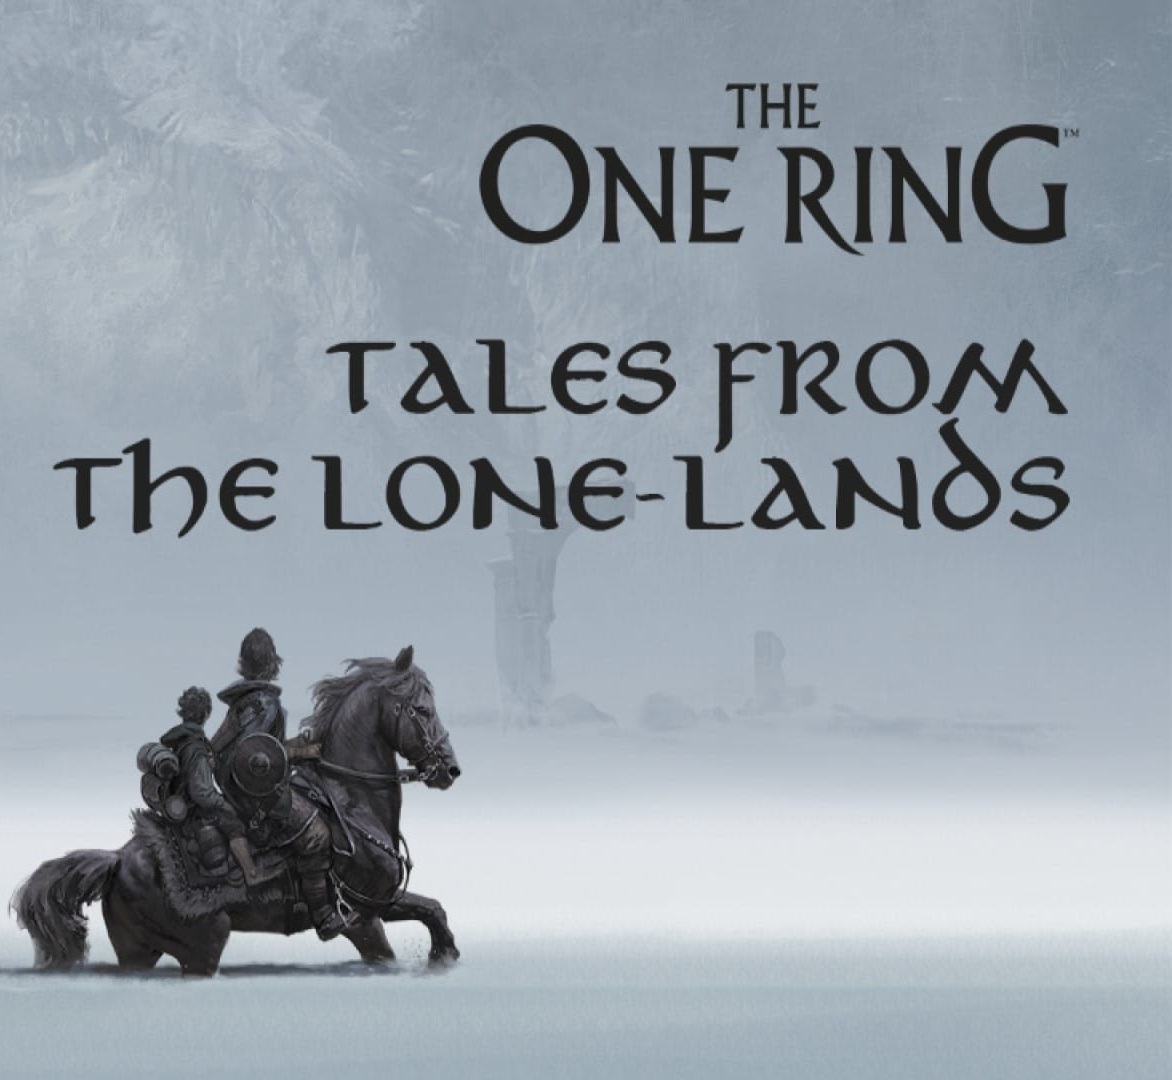 The One Ring Tales From The Lone-Lands Featured Artwork.jpg